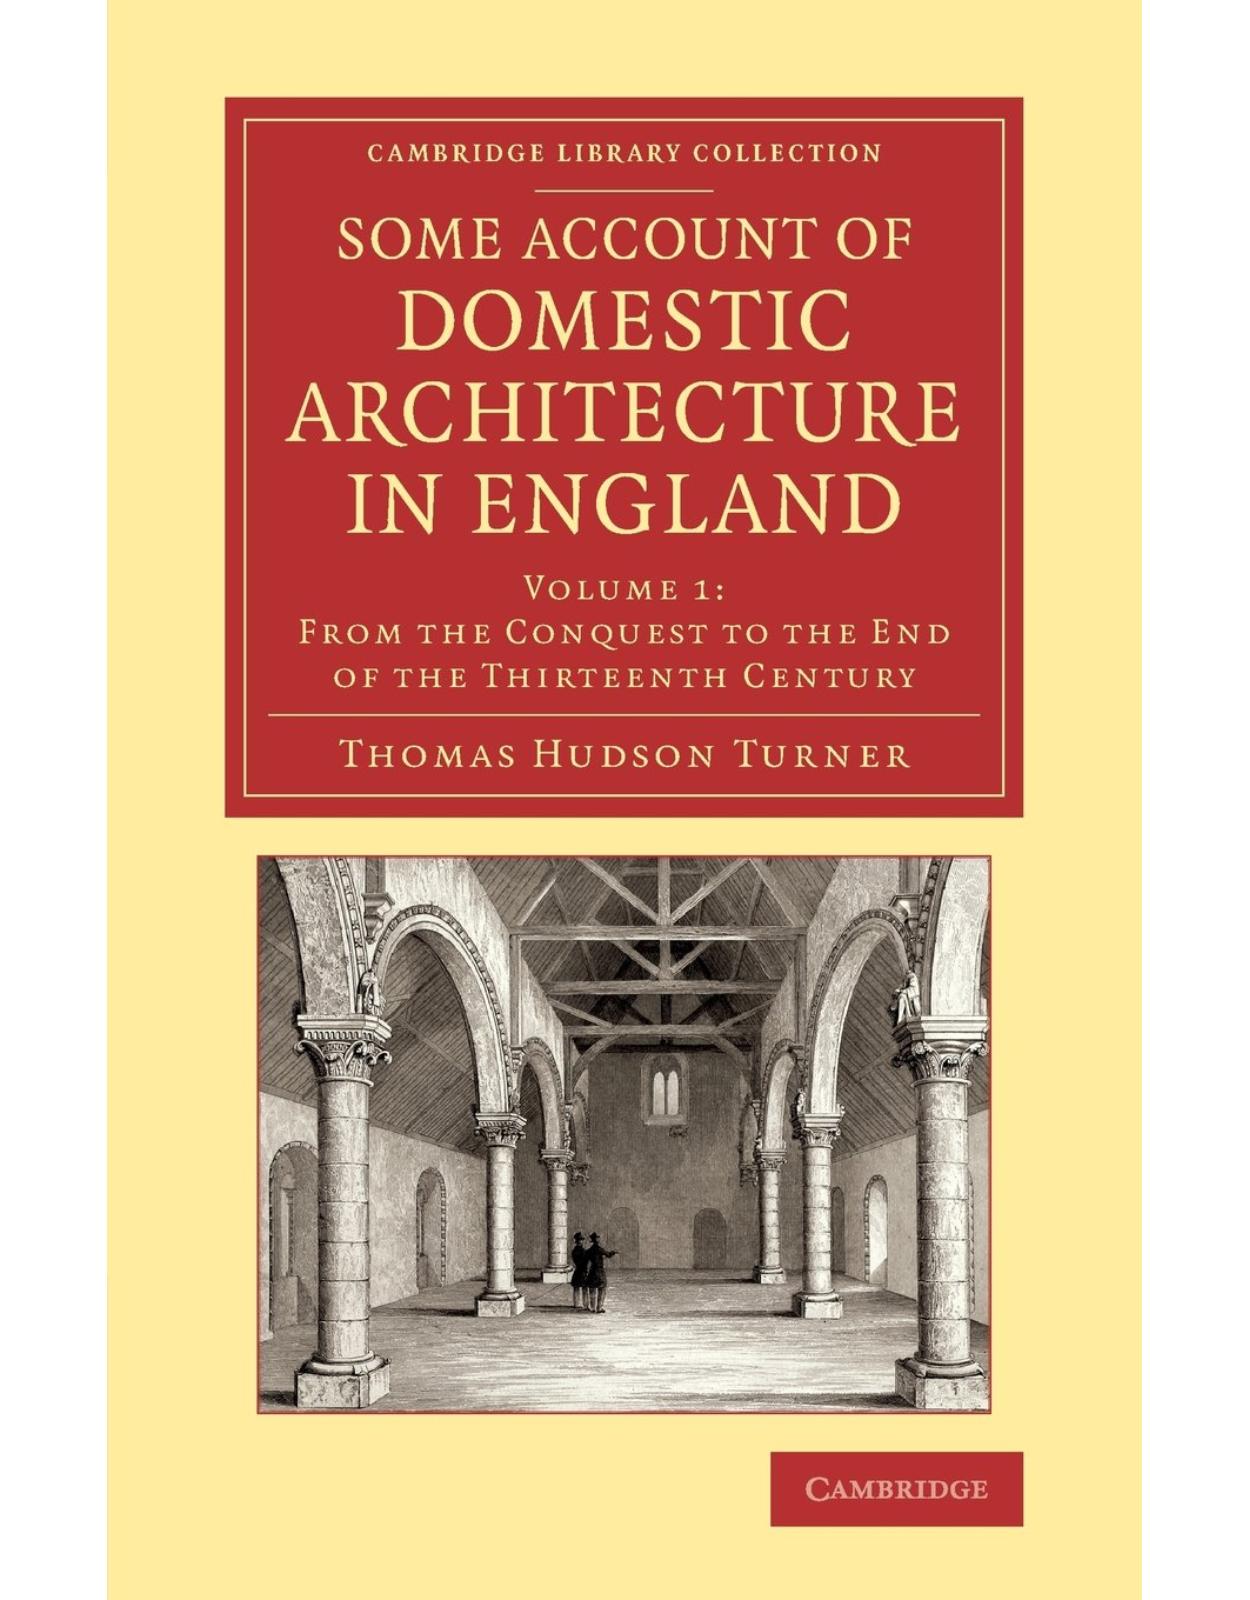 Some Account of Domestic Architecture in England 2 Volume Set: Some Account of Domestic Architecture in England: From the Conquest to the End of the ... Library Collection - Art and Architecture) 